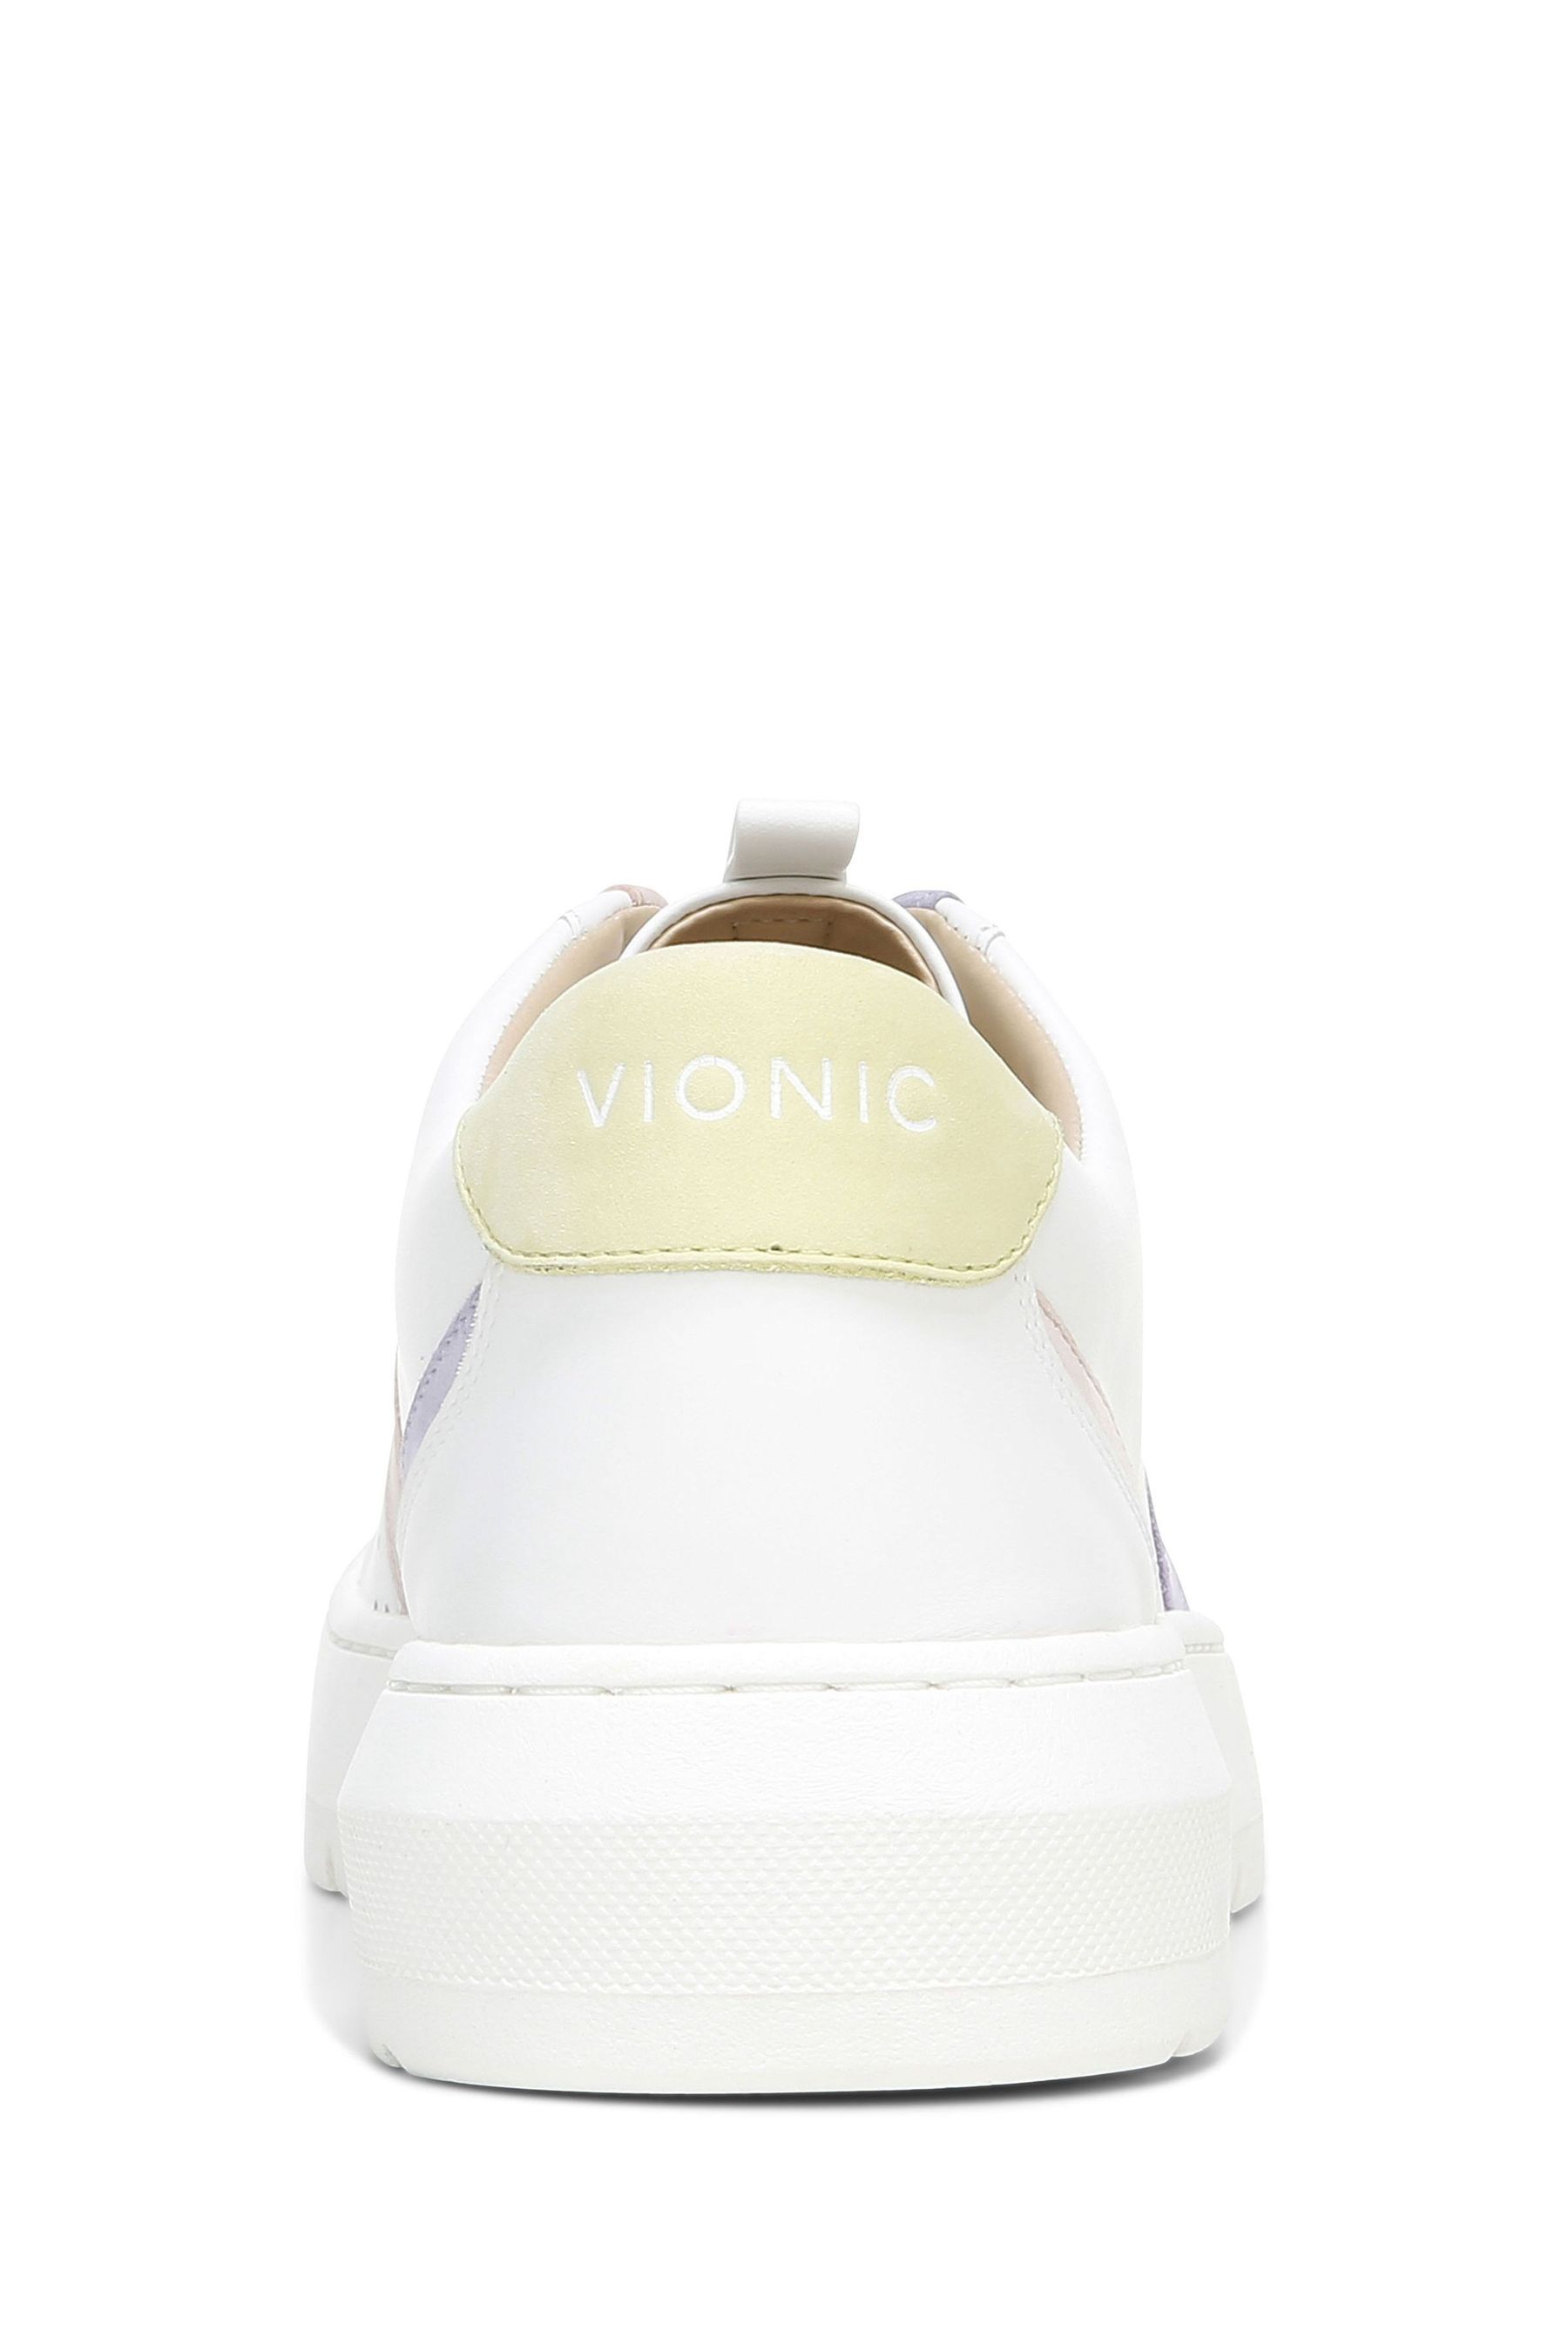 Buy Vionic Simasa Cup Sole Sneaker Trainers from the Next UK online shop